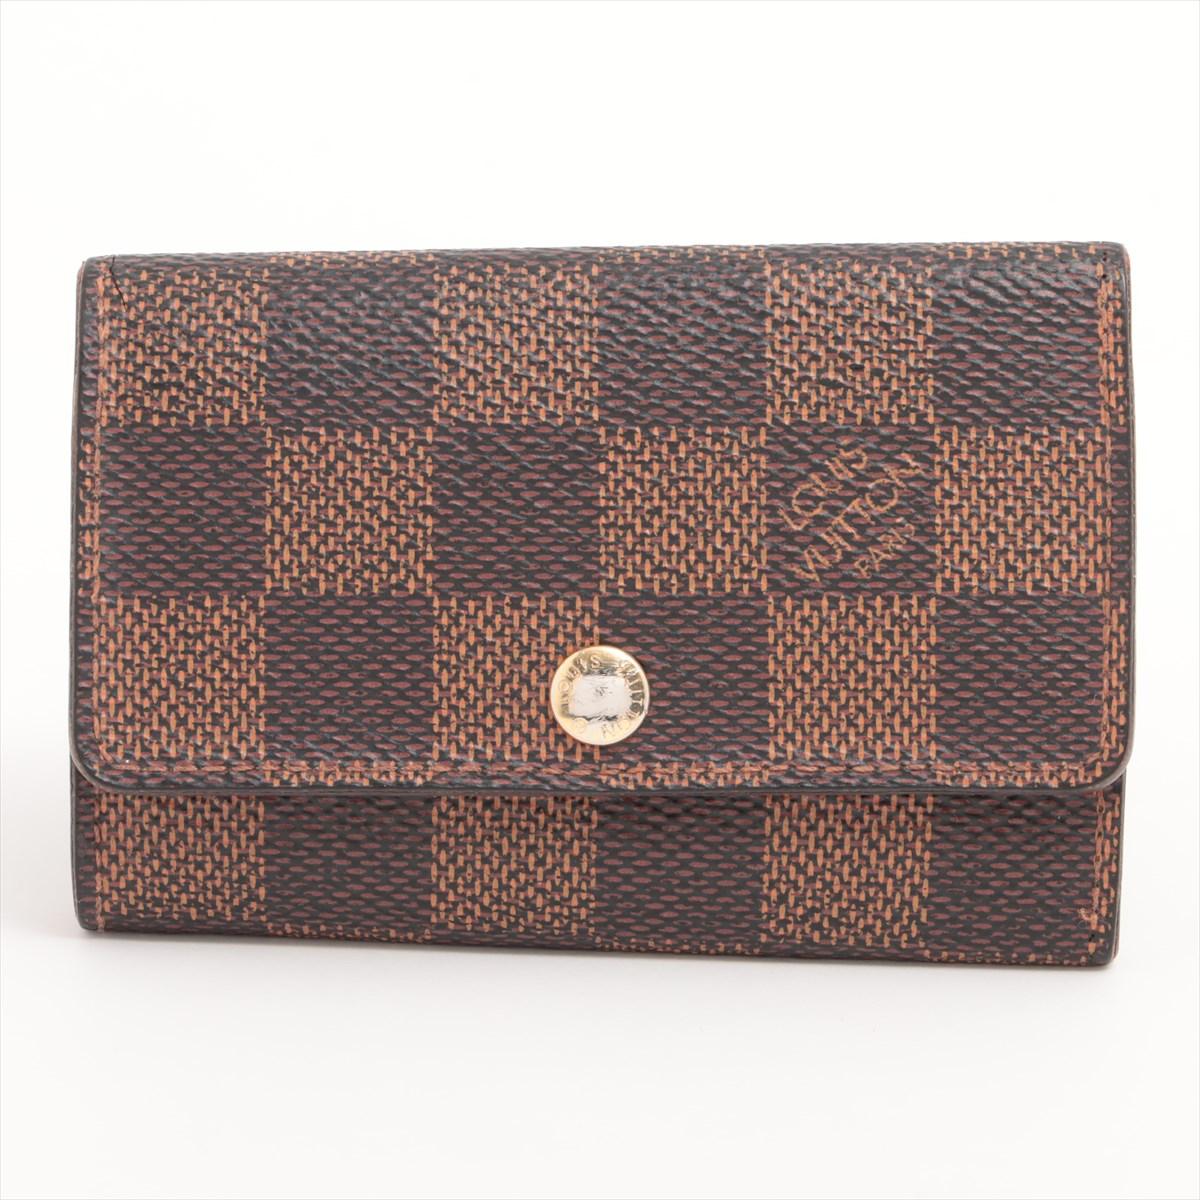 The Louis Vuitton Damier Ebene Multiclés 6 Key Case is a sleek and practical accessory that combines luxury with functionality. Crafted from the iconic Damier Ebene canvas, the key case features a classic brown checkered pattern that exudes timeless